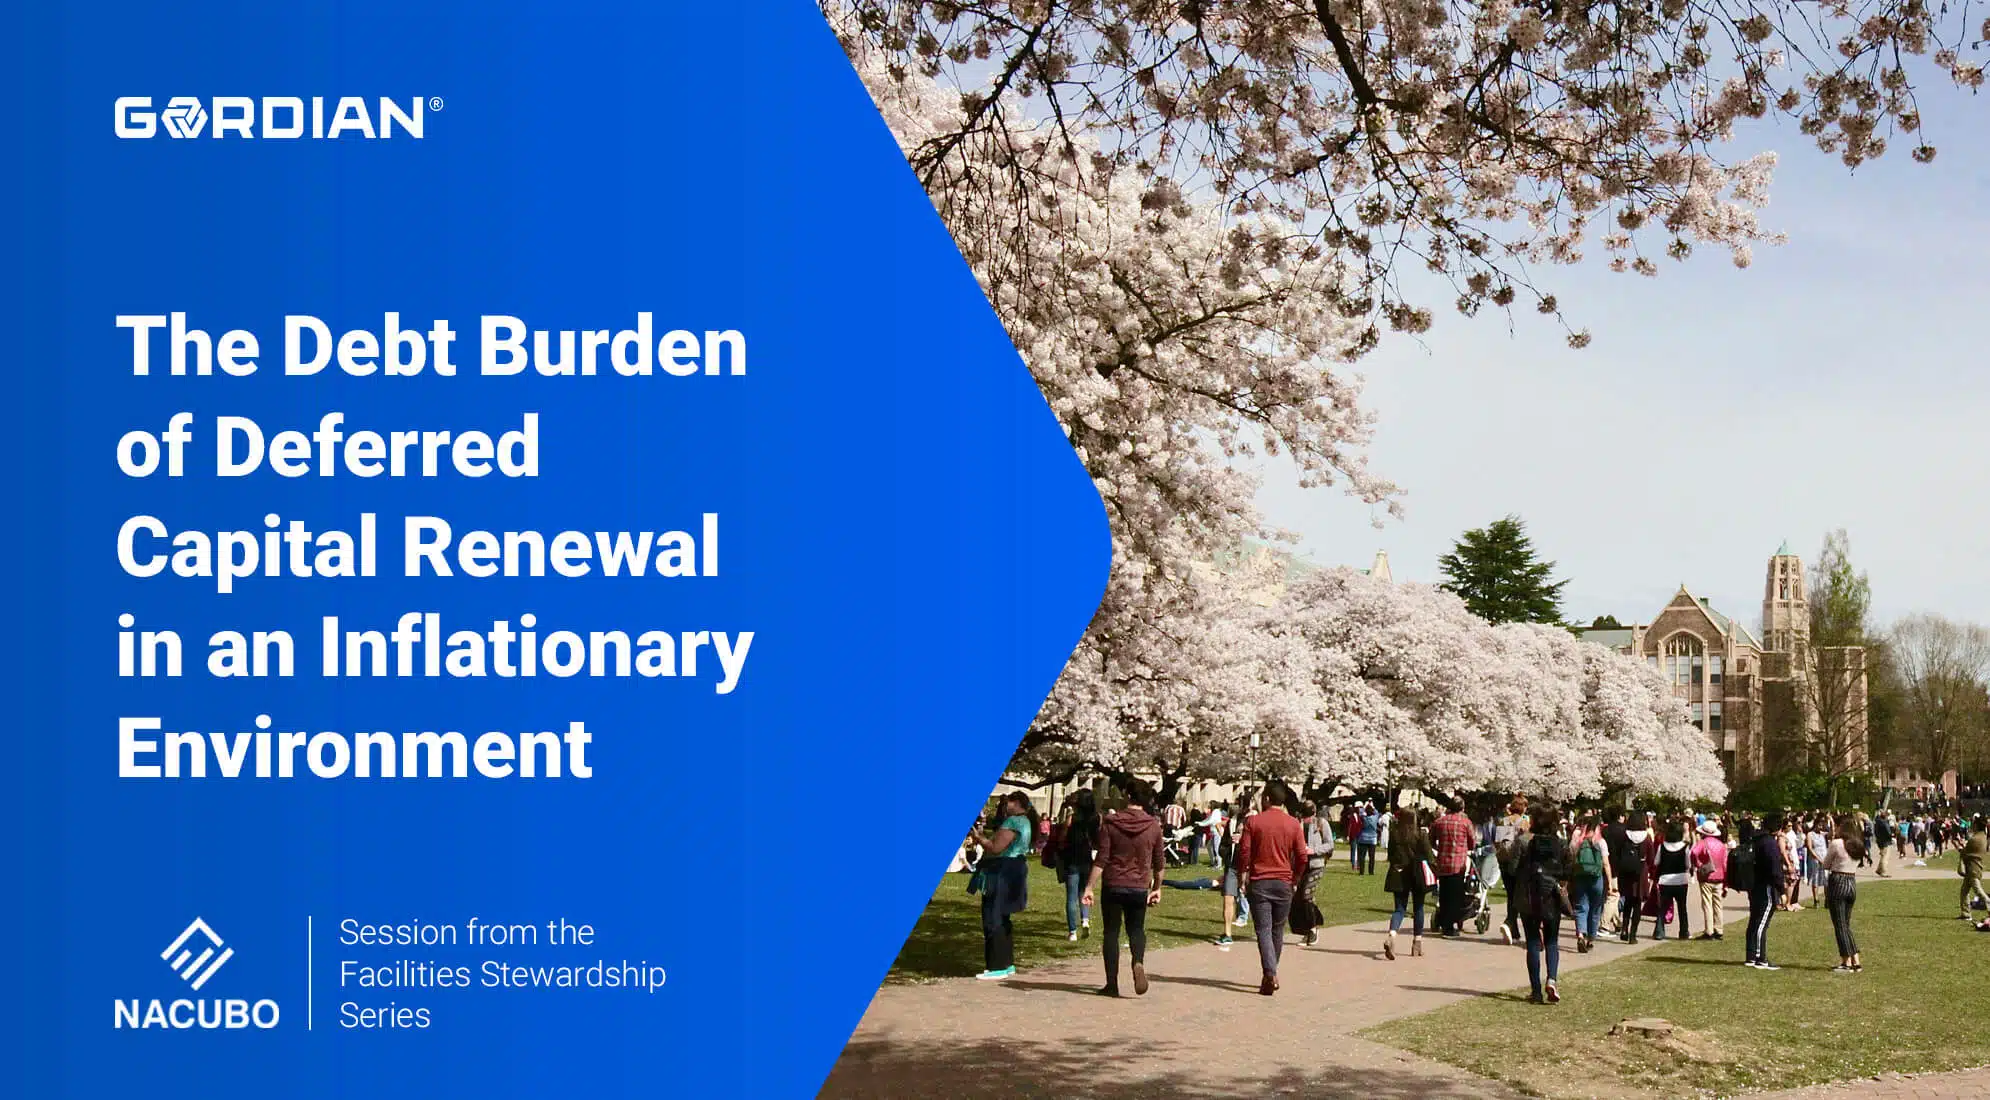 Facilities Stewardship Series: The Debt Burden of Deferred Capital Renewal in an Inflationary Environment 6